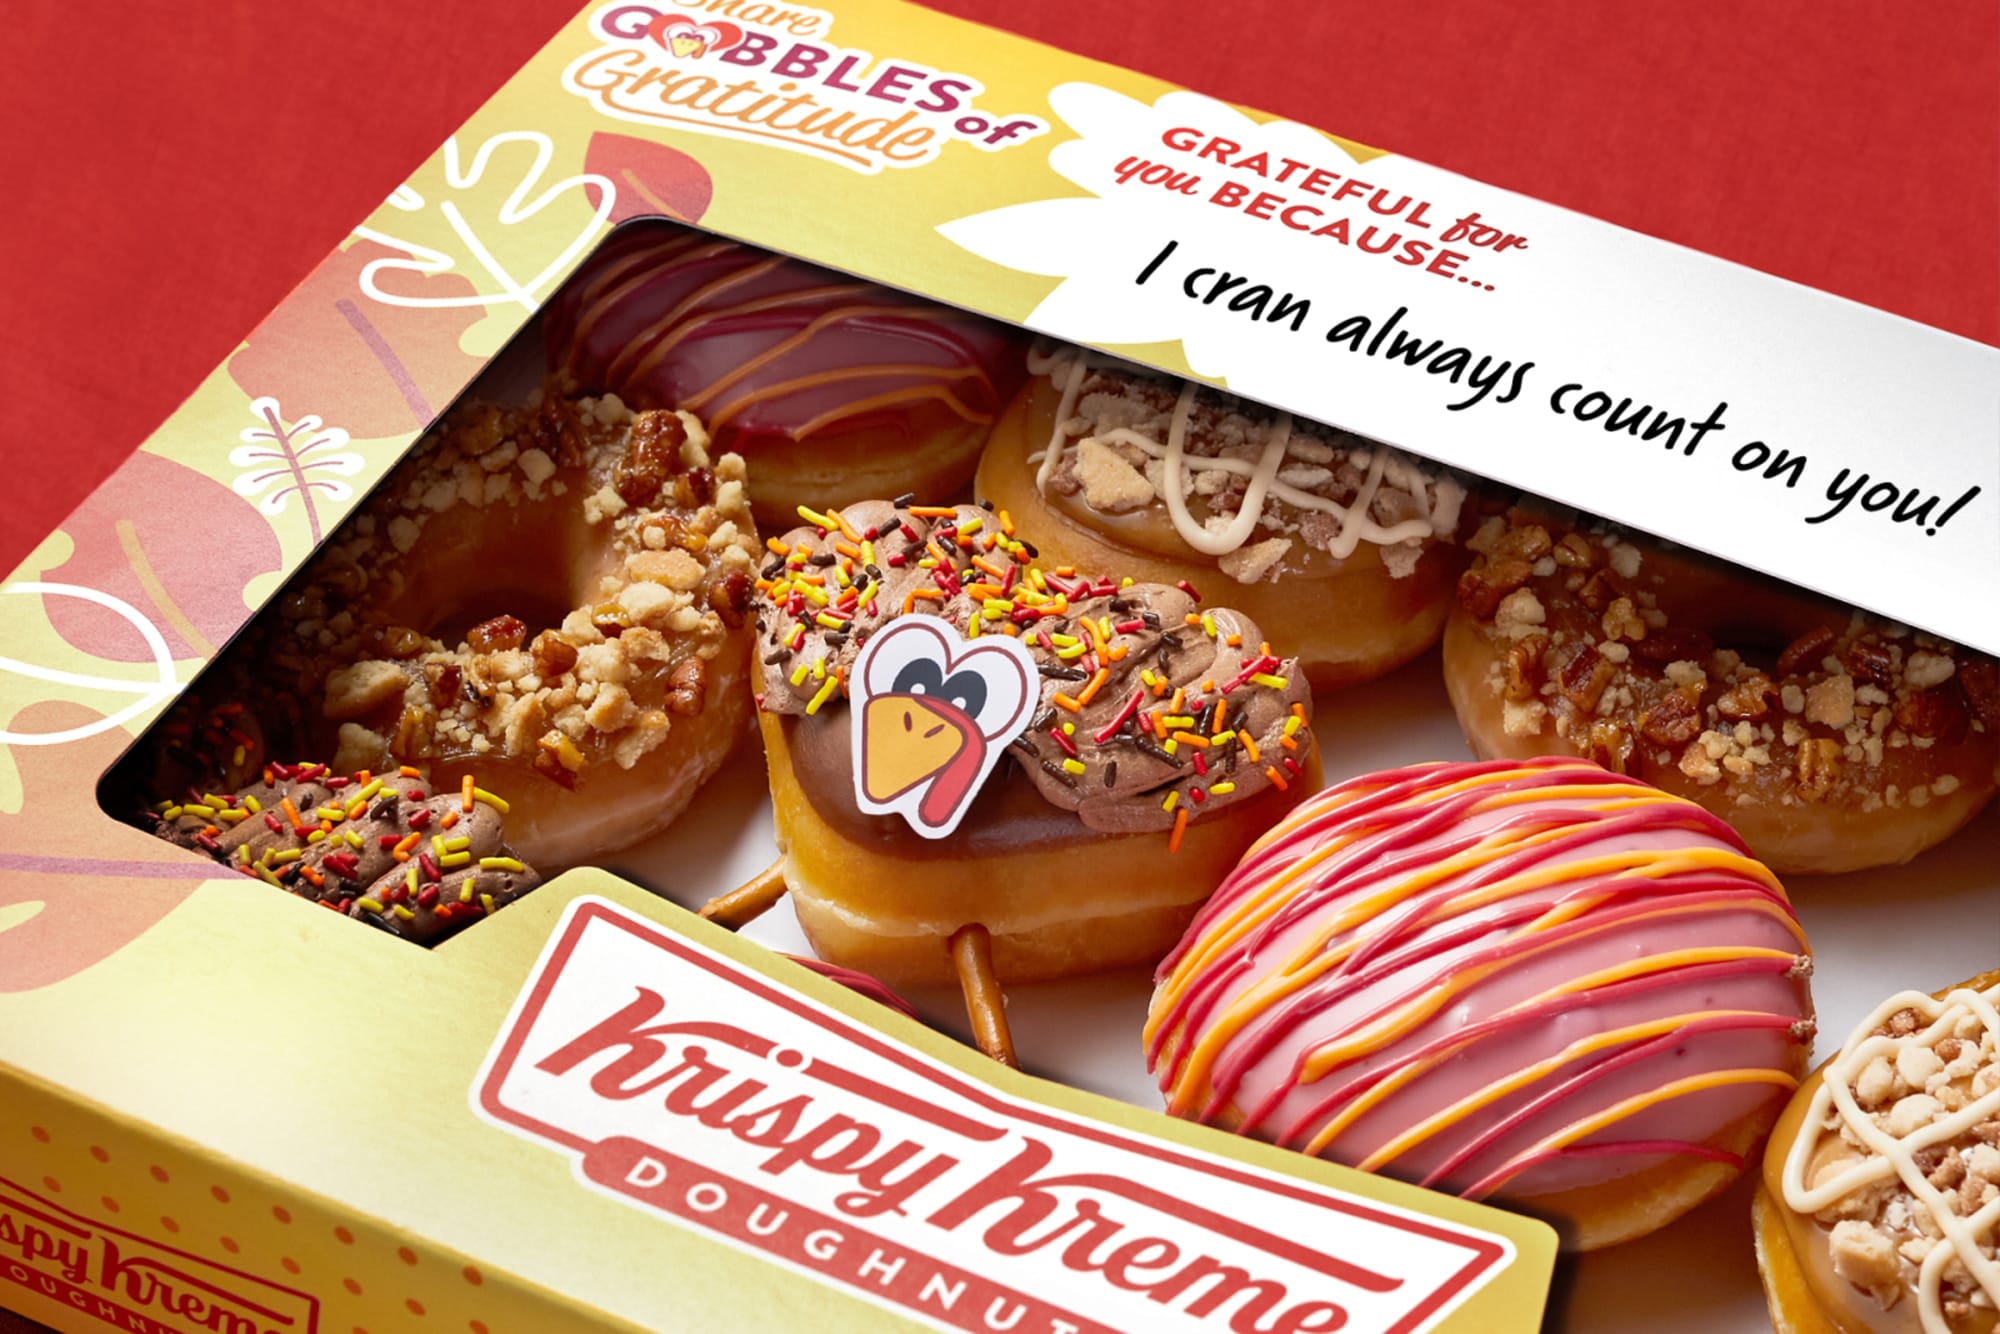 Krispy Kreme is ready for Thanksgiving with their new doughnut collection